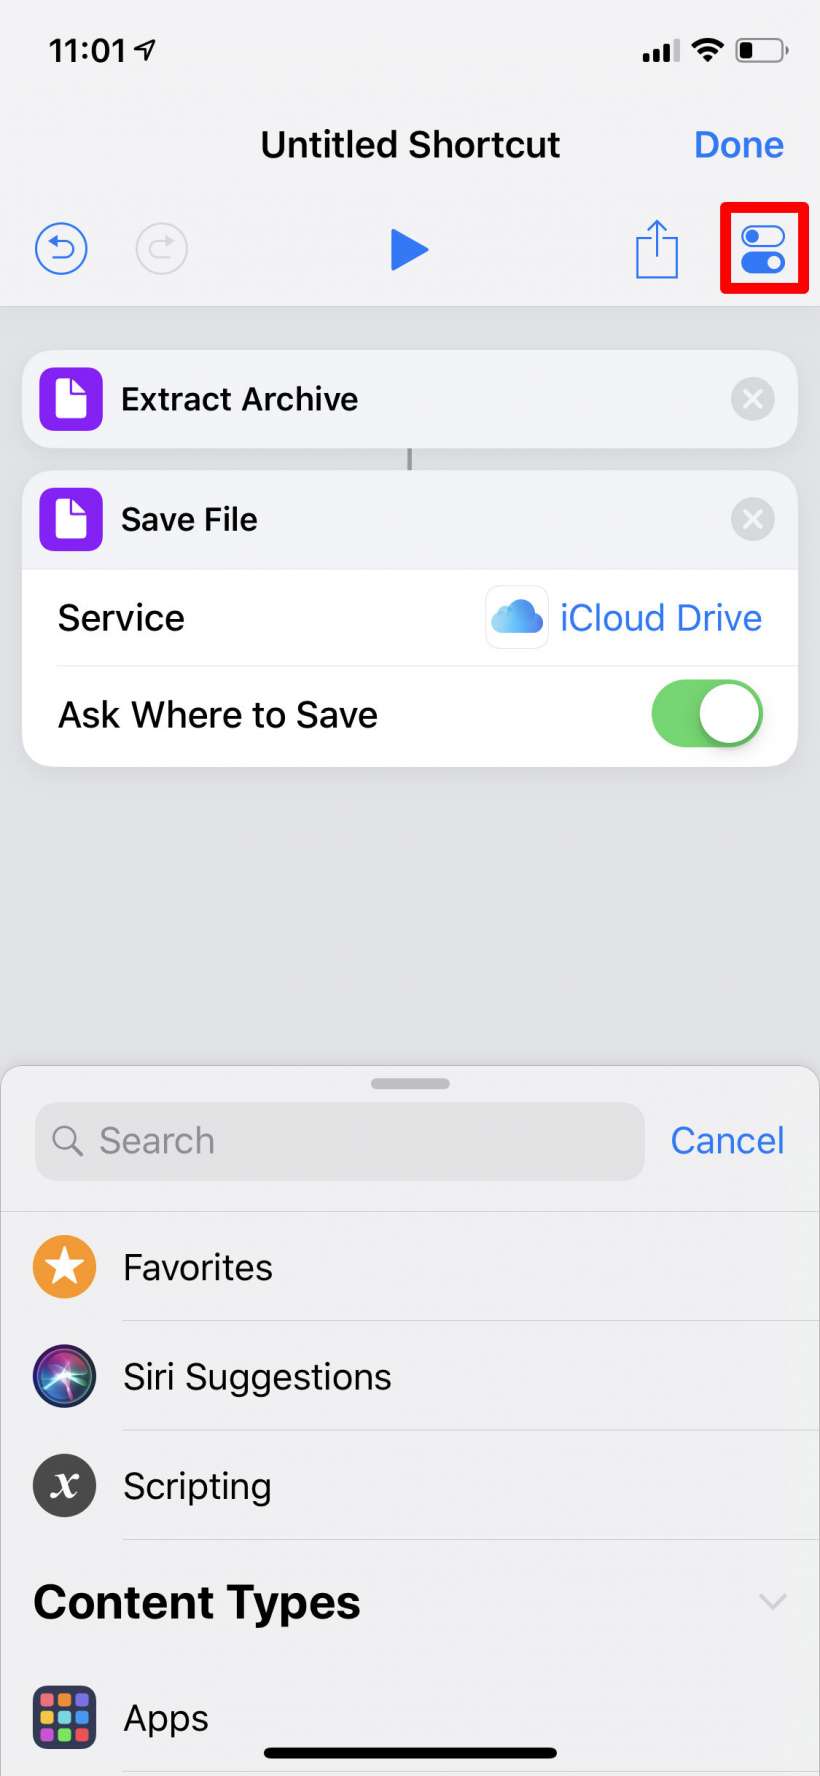 How to unzip compressed files on iPhone and iPad with a shortcut.